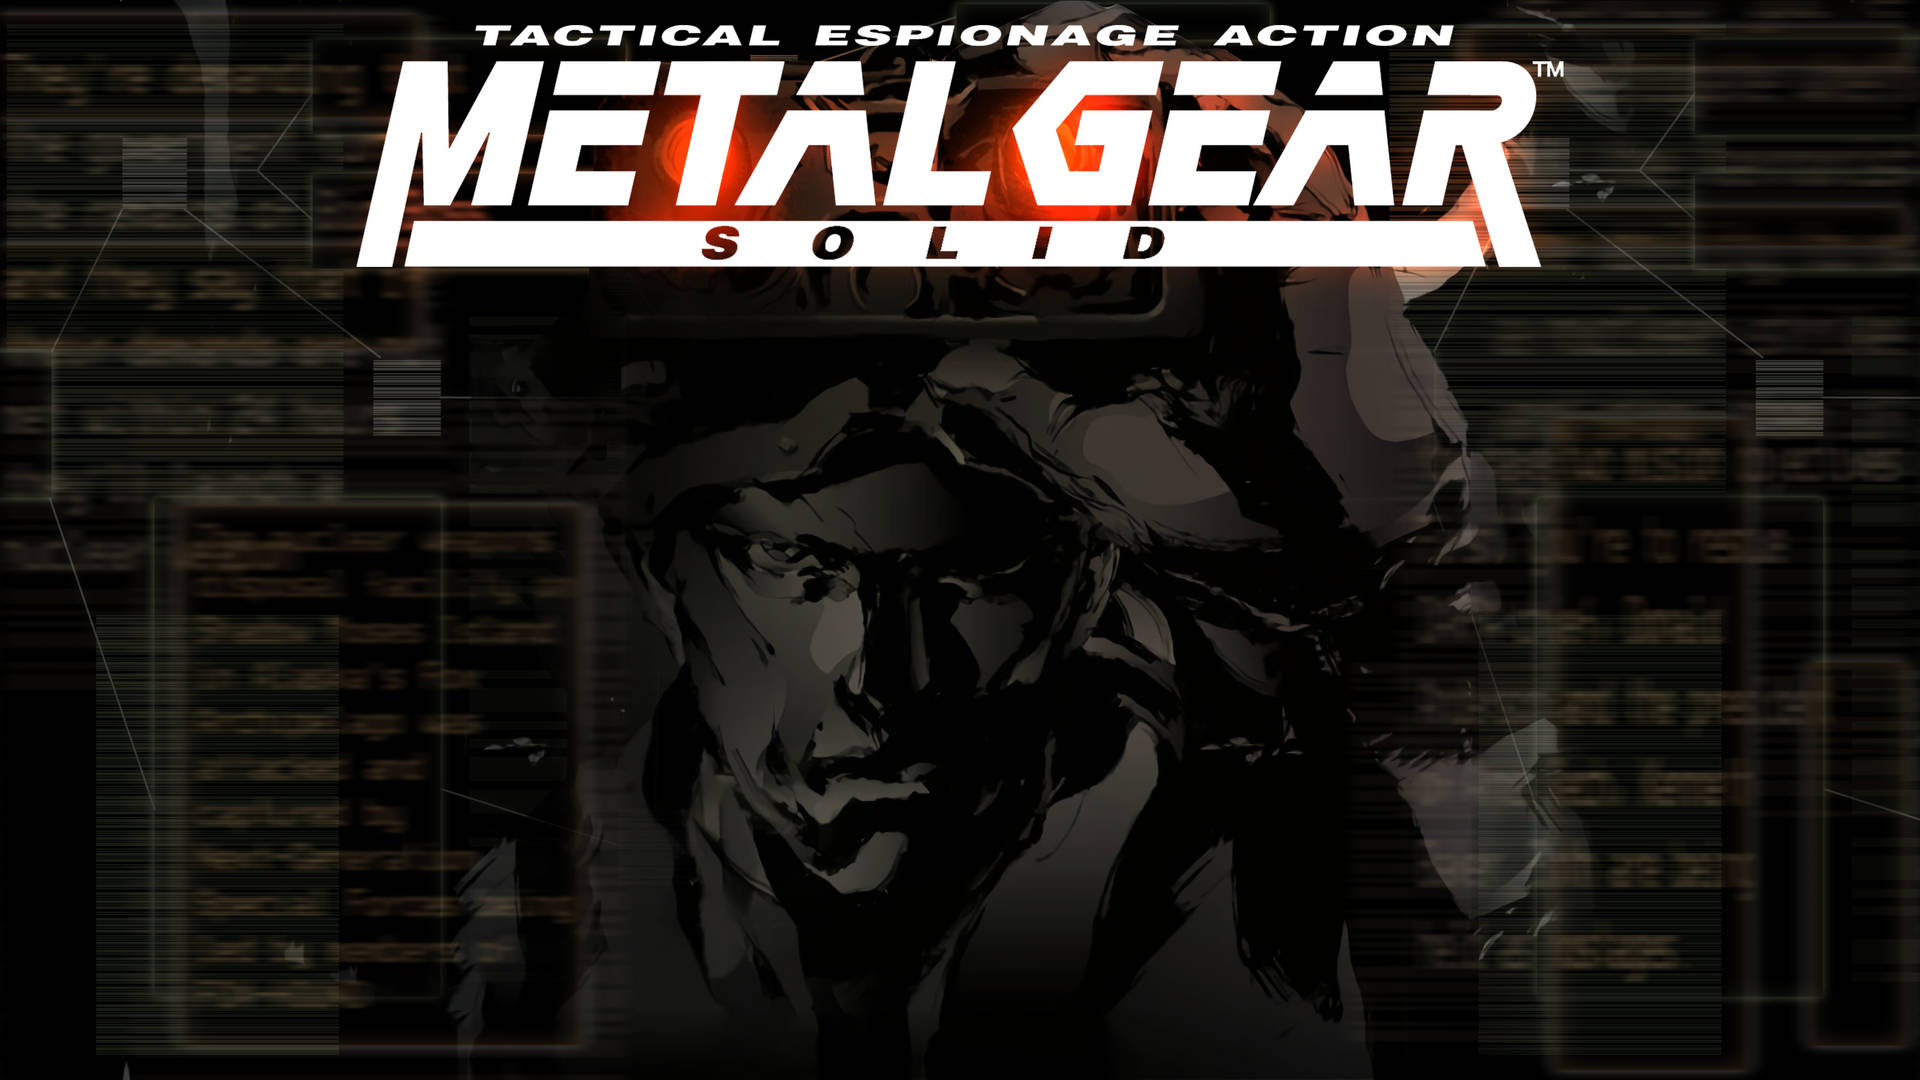 Relive Metal Gear Solid with its tactical espionage action Wallpaper